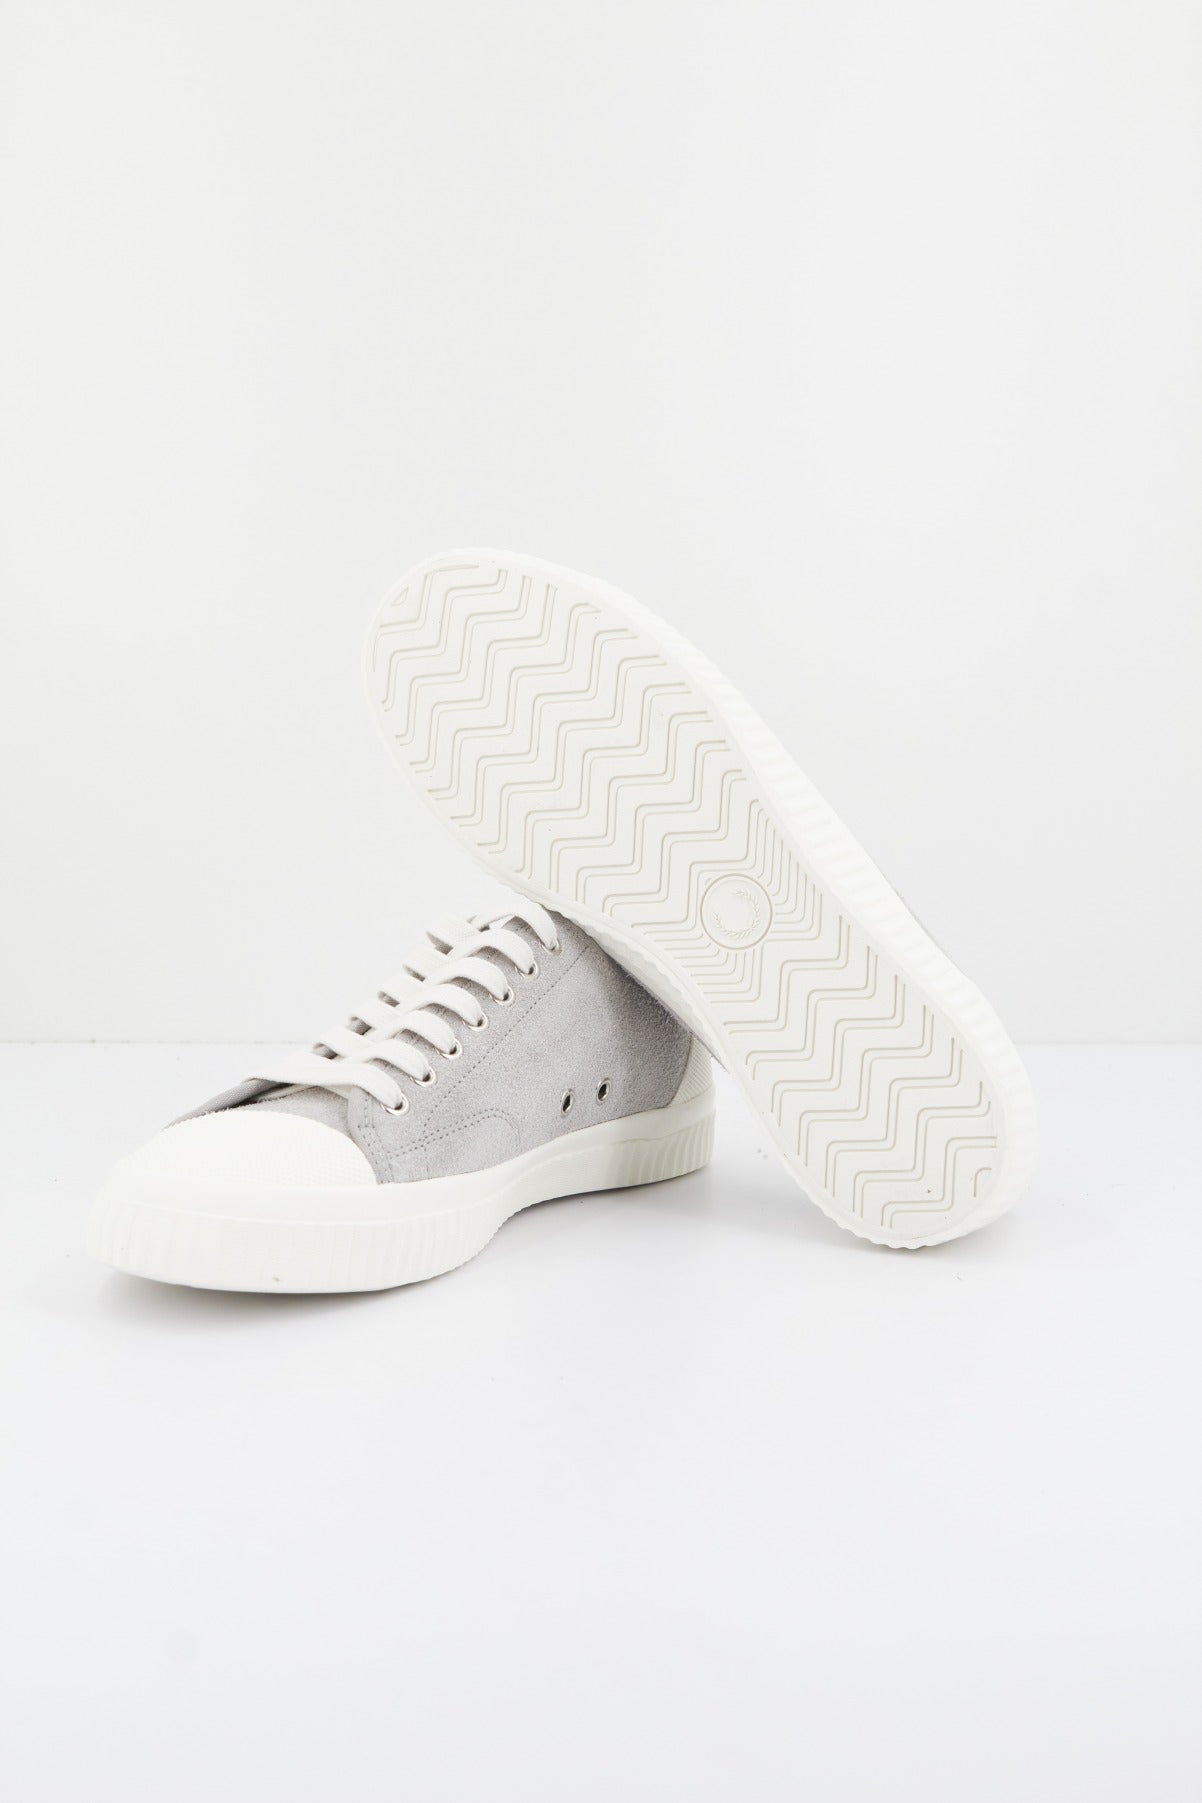 FRED PERRY HUGHES LOW TEXTURED SUEDE en color GRIS  (4)